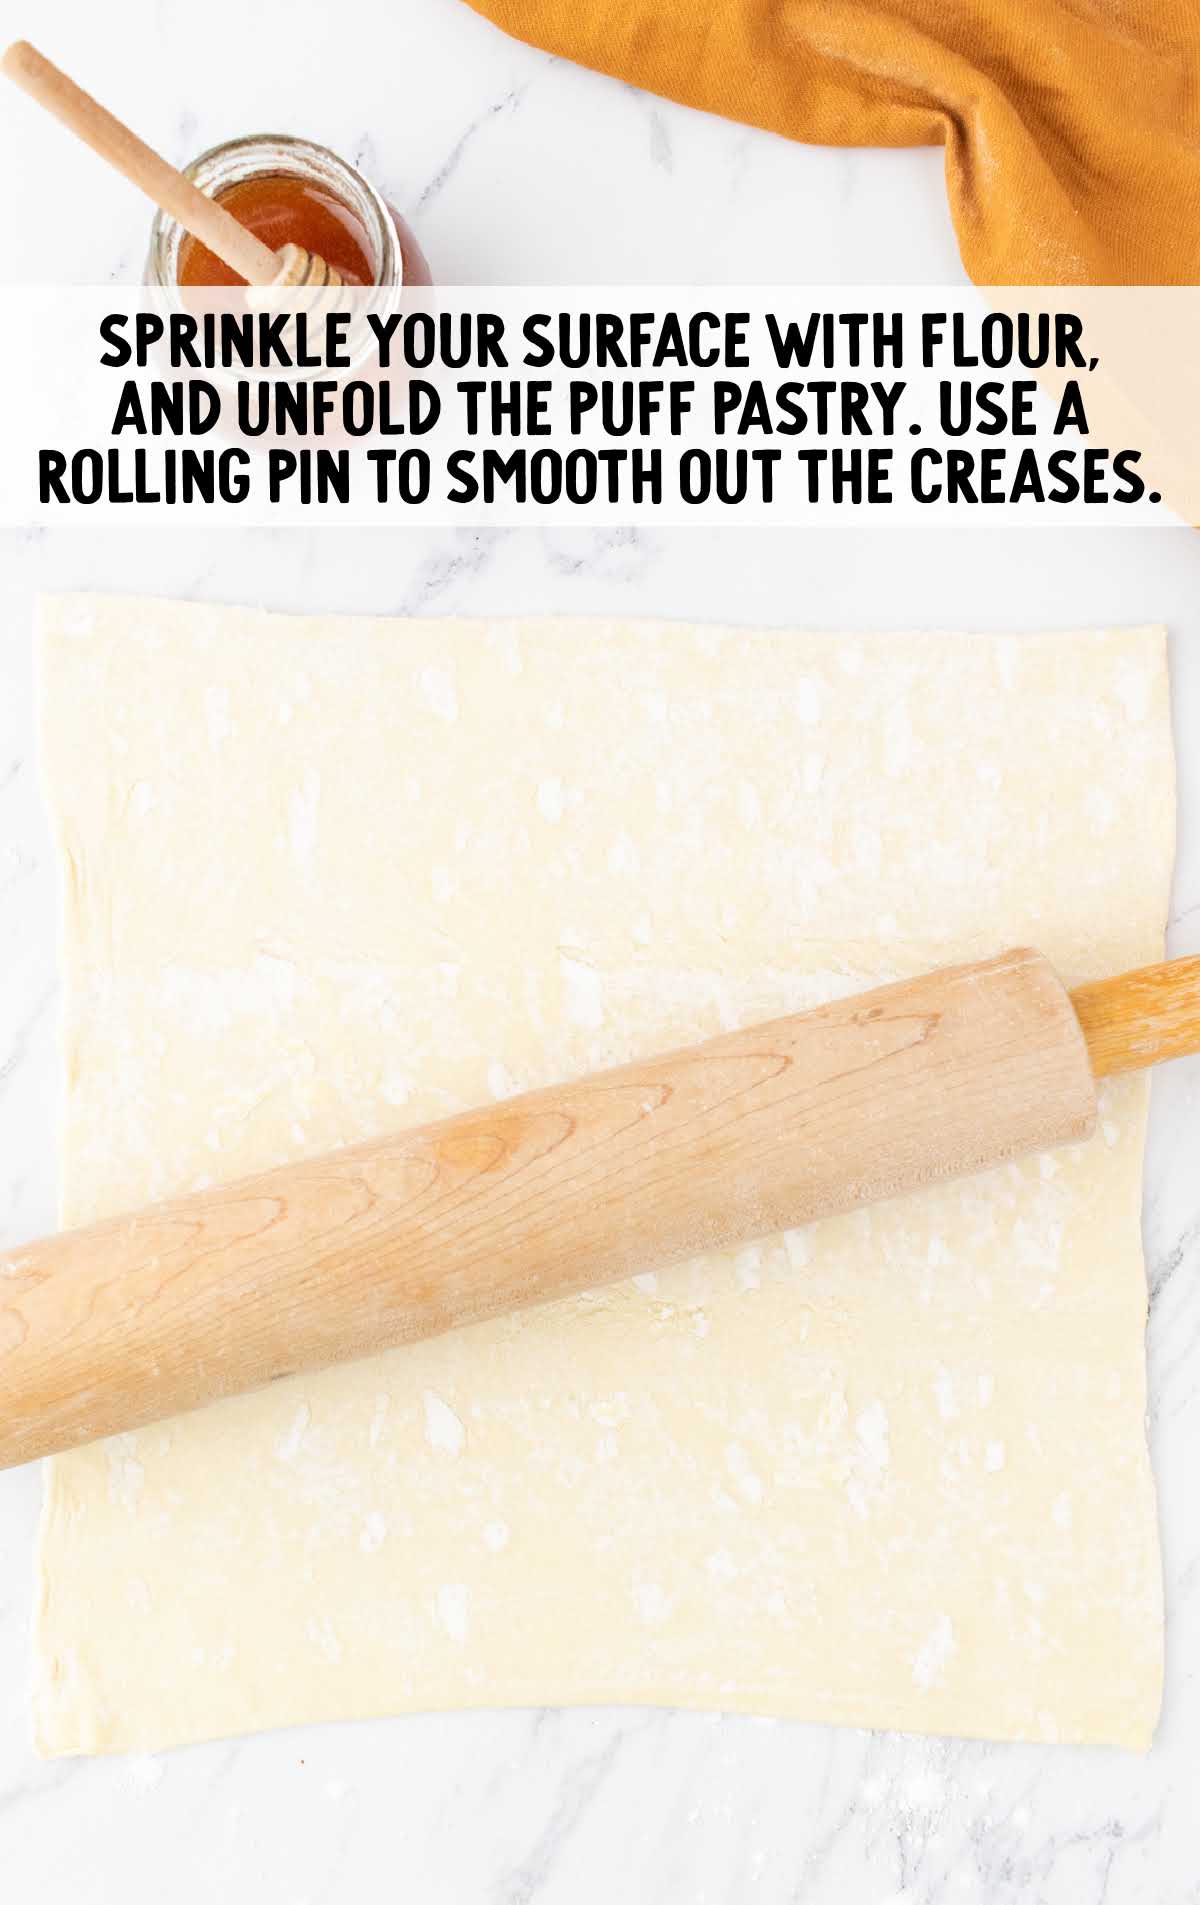 sprinkle the surface with flour, and unfold the puff pastry